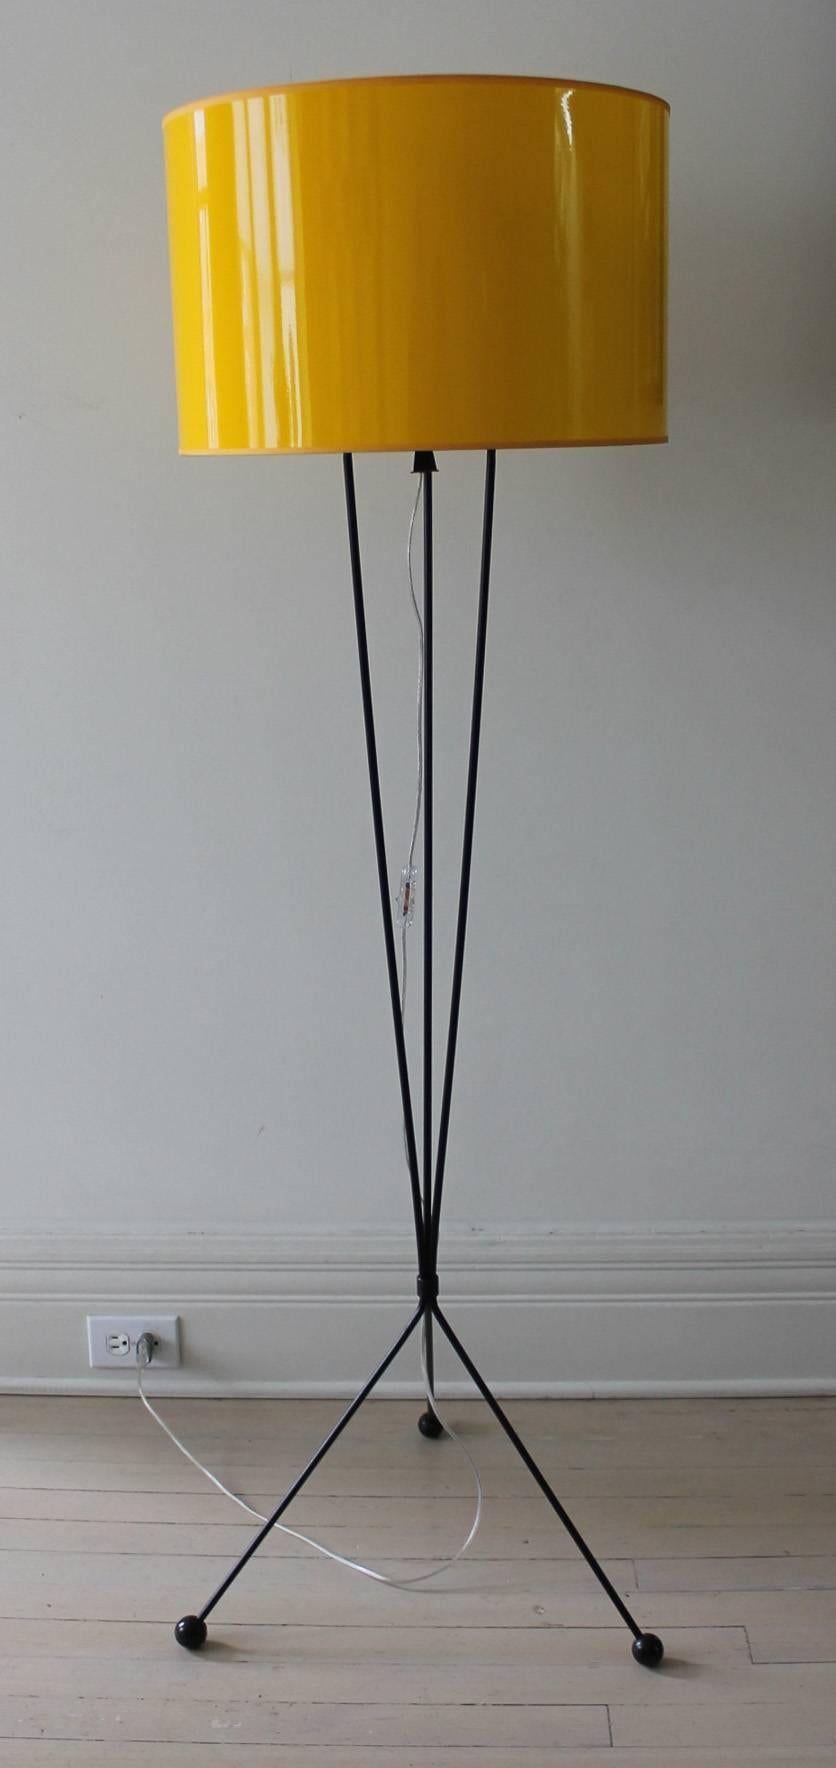 Fully restored black enameled metal tripod lamp. Painted wood feet, metal structure and new high gloss lacquered yellow shade. Manufactured in 1960s by 